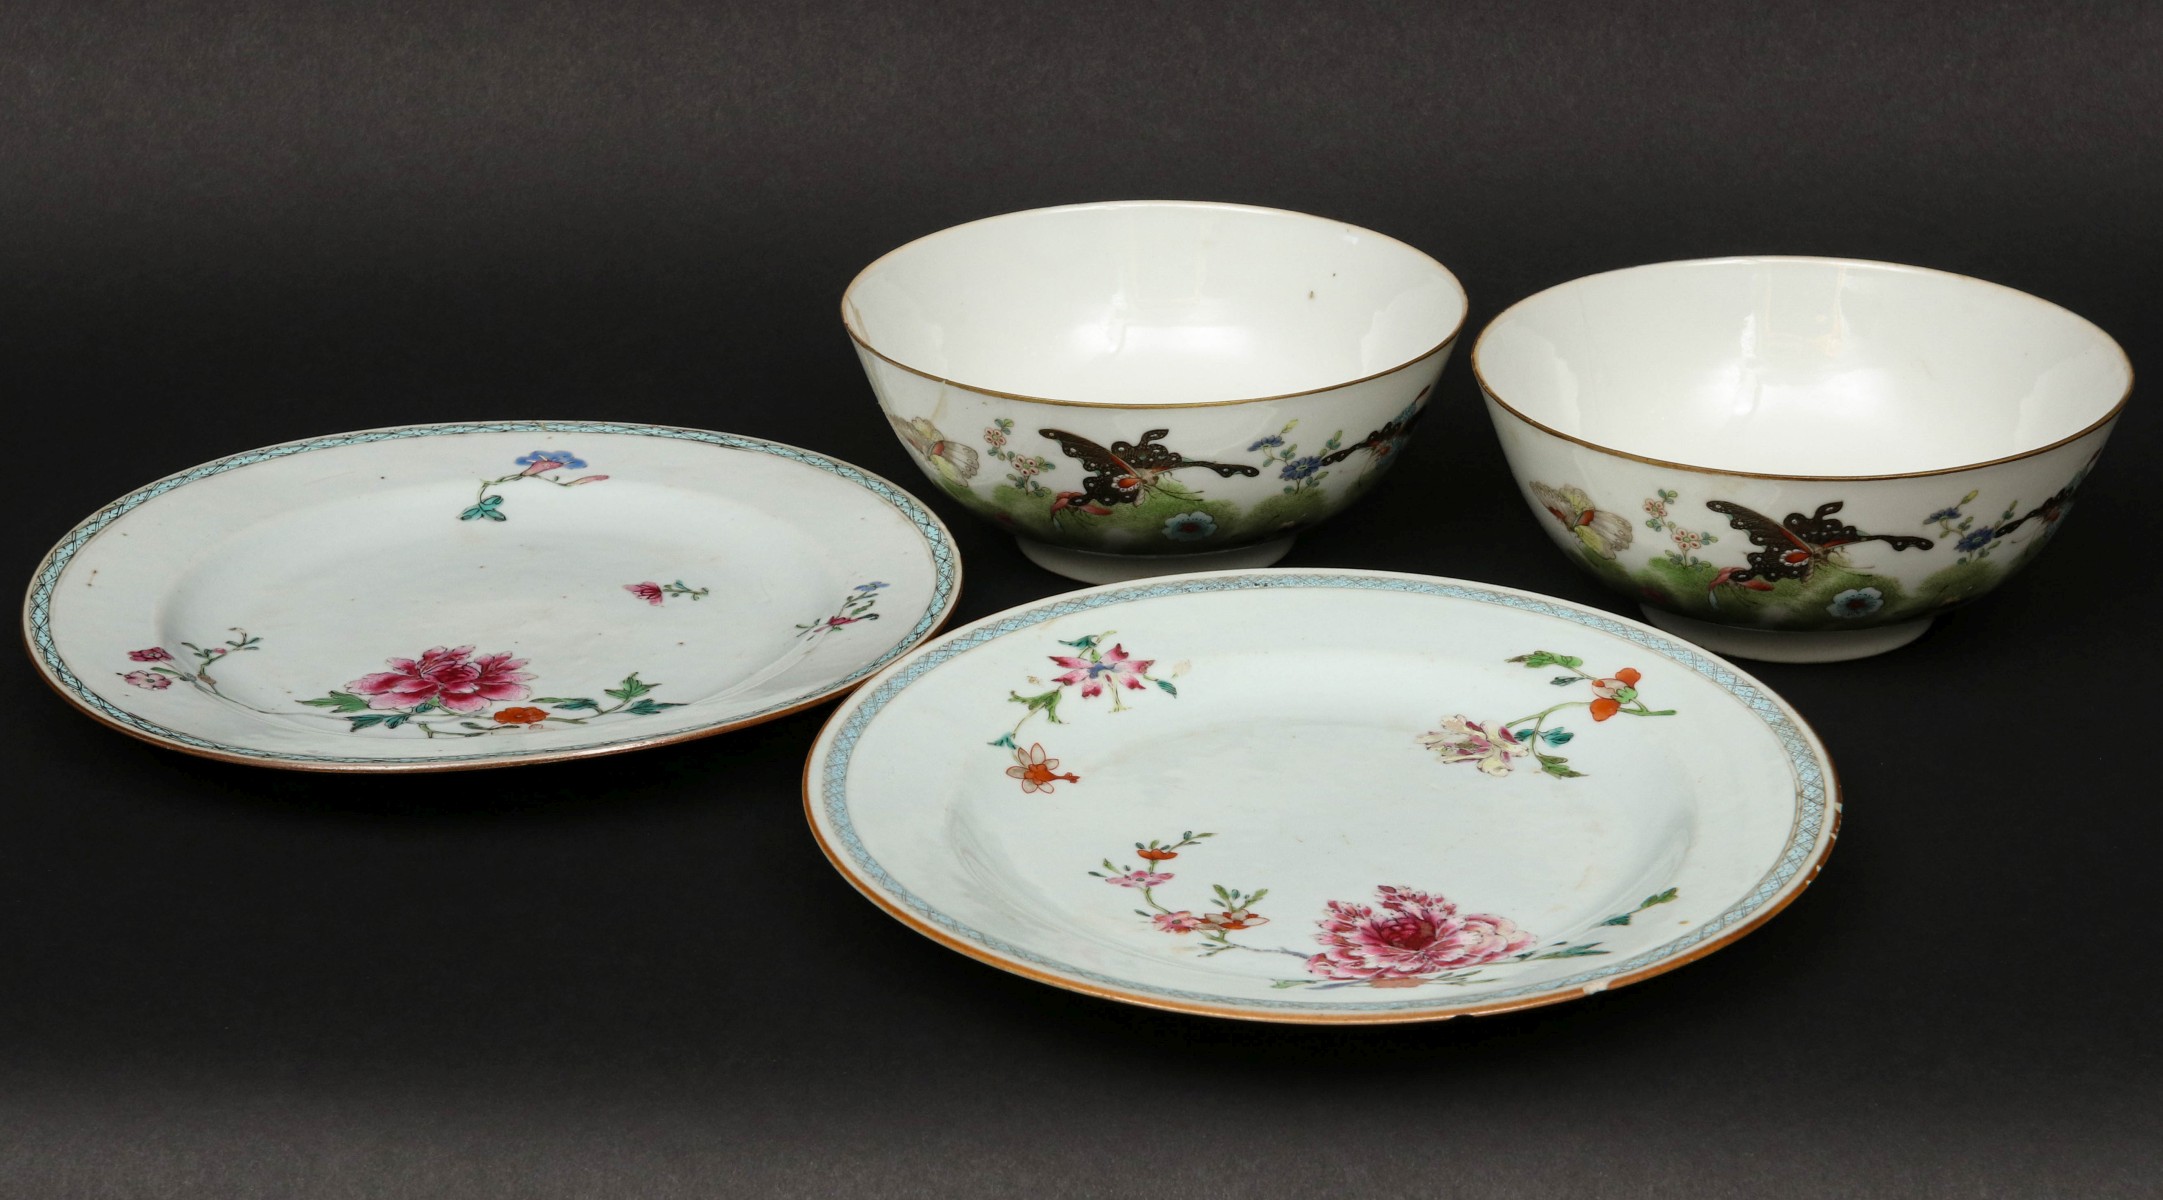 A GROUPING OF 18TH CENTURY CHINESE PORCELAIN